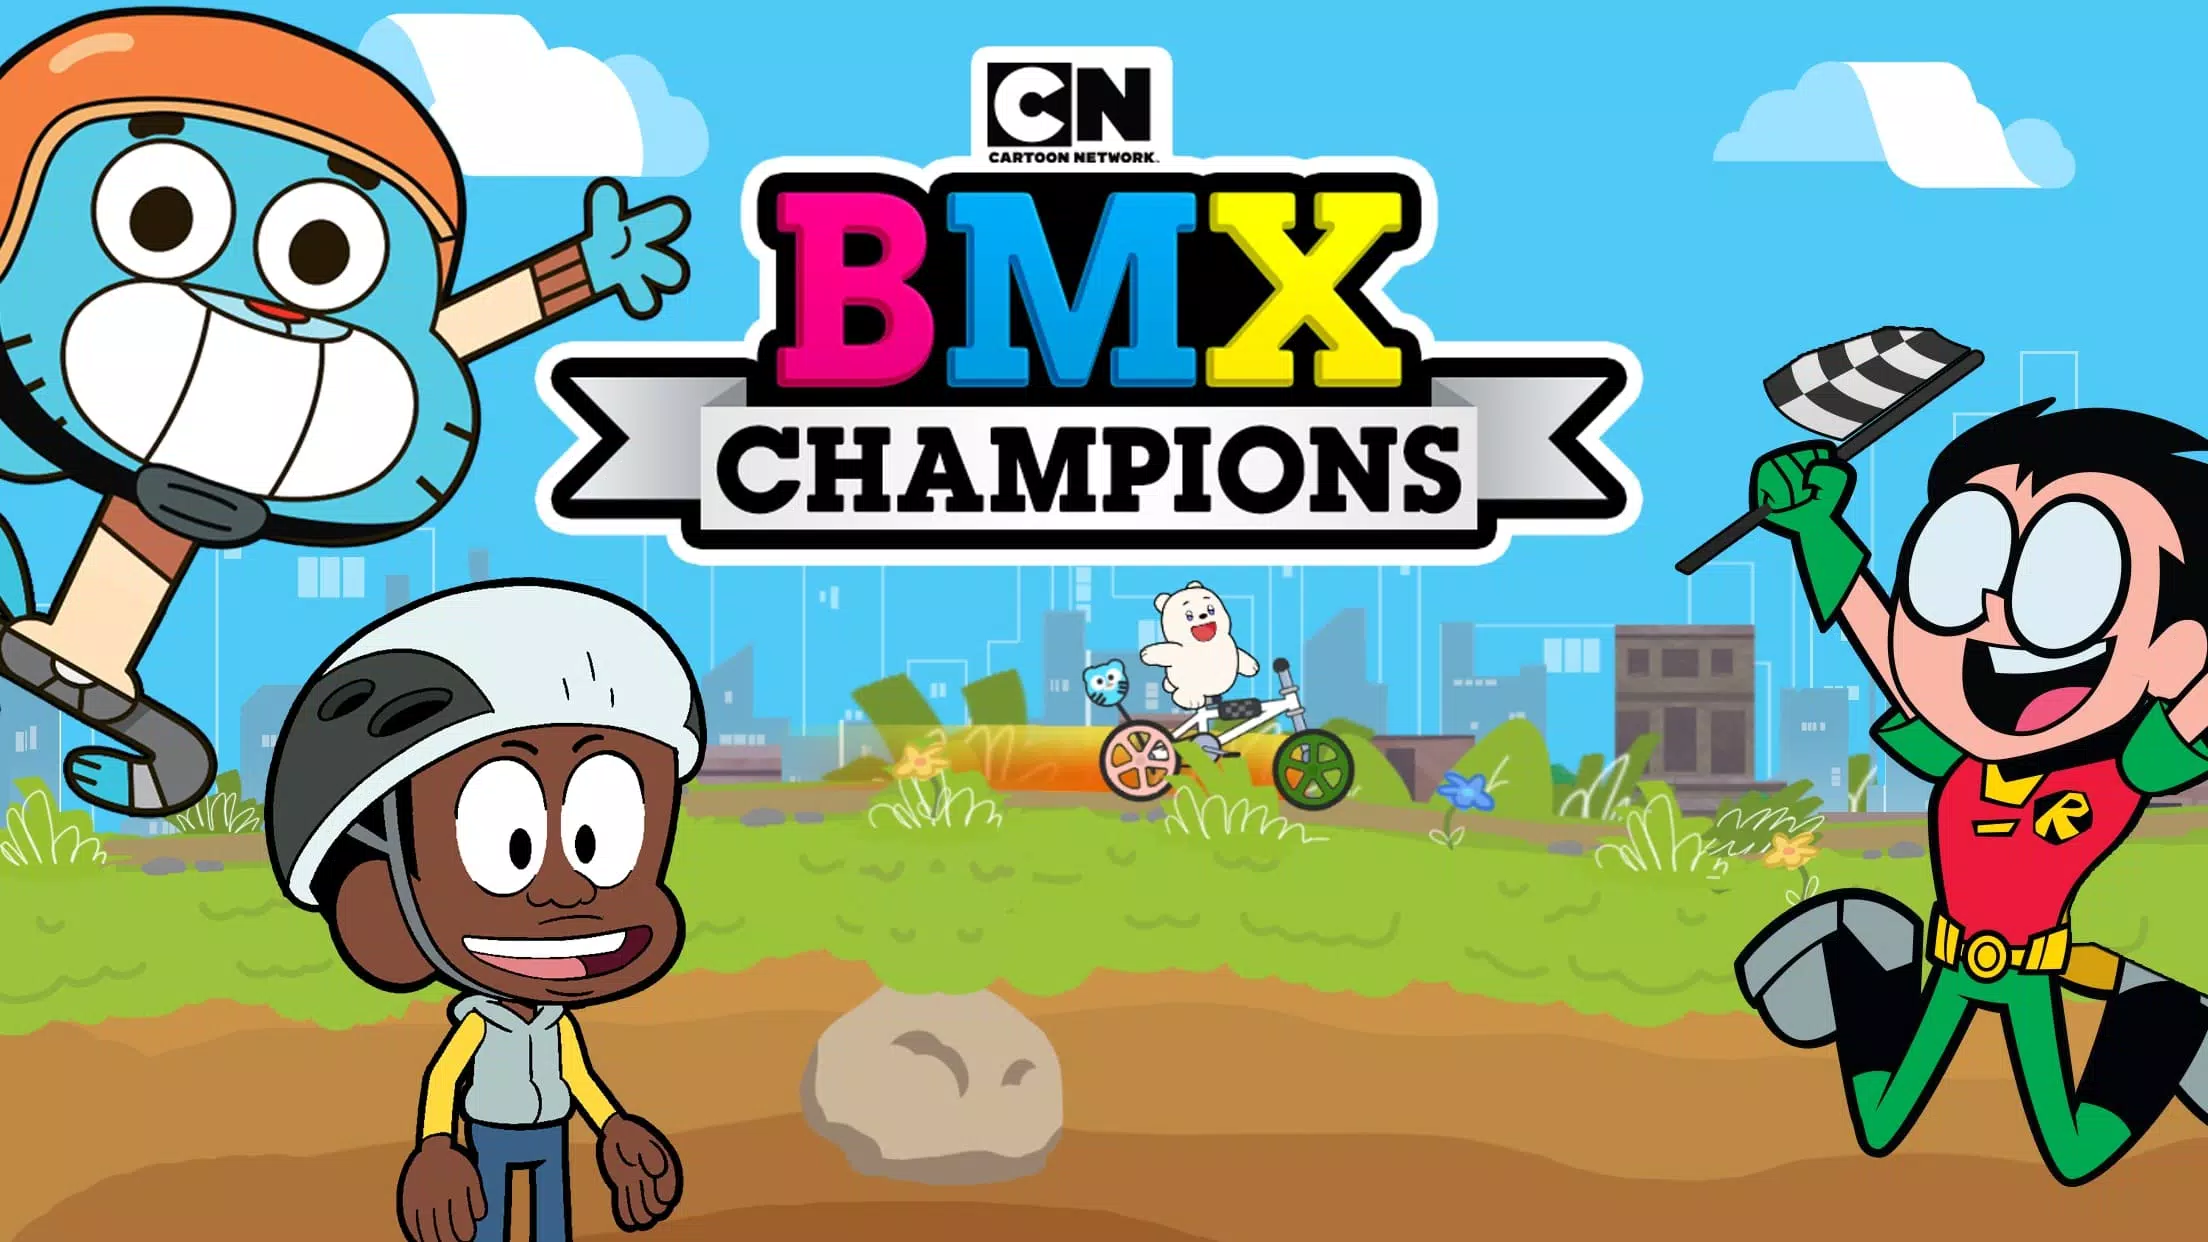 Cartoon Network Free App GameBox Launches in EMEA